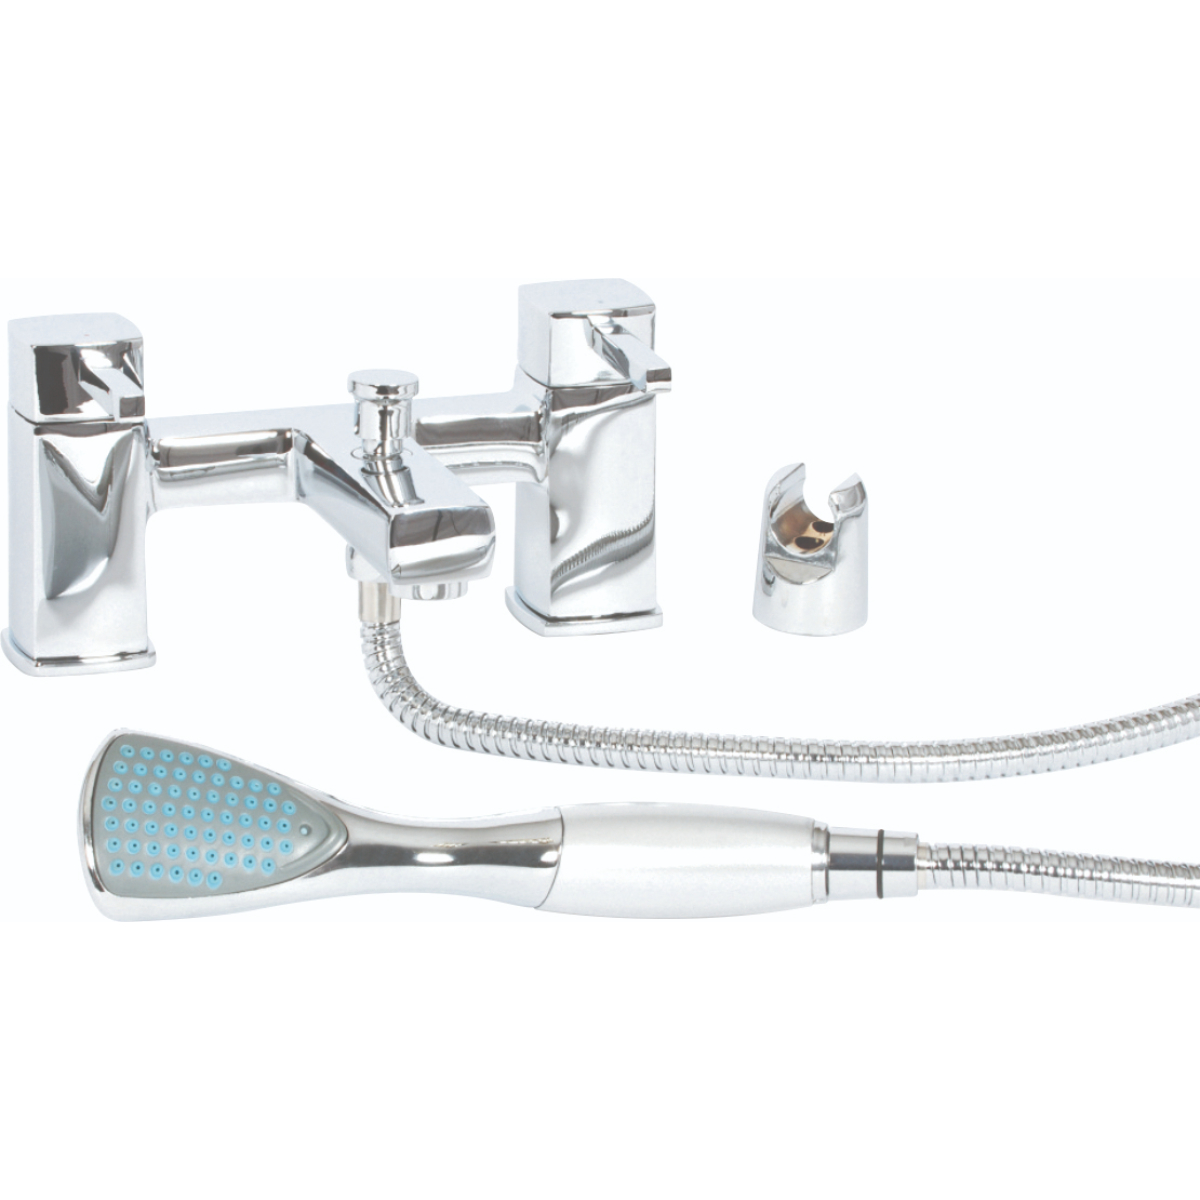 Sky Chrome Bath Shower Mixer Tap And Shower Kit